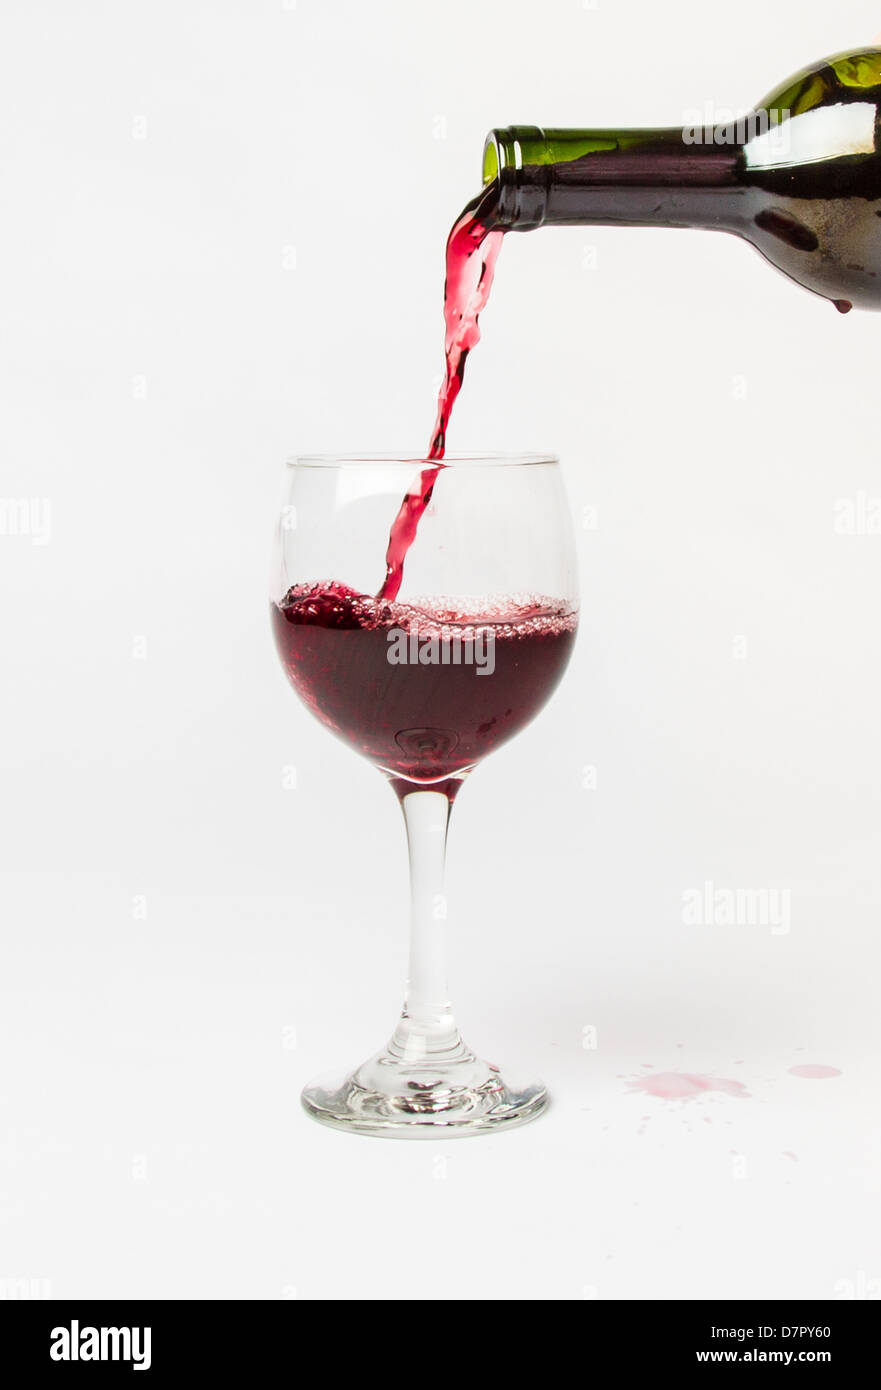 Red Wine pouring out of a bottle into a glass and splattering the white background. Stock Photo